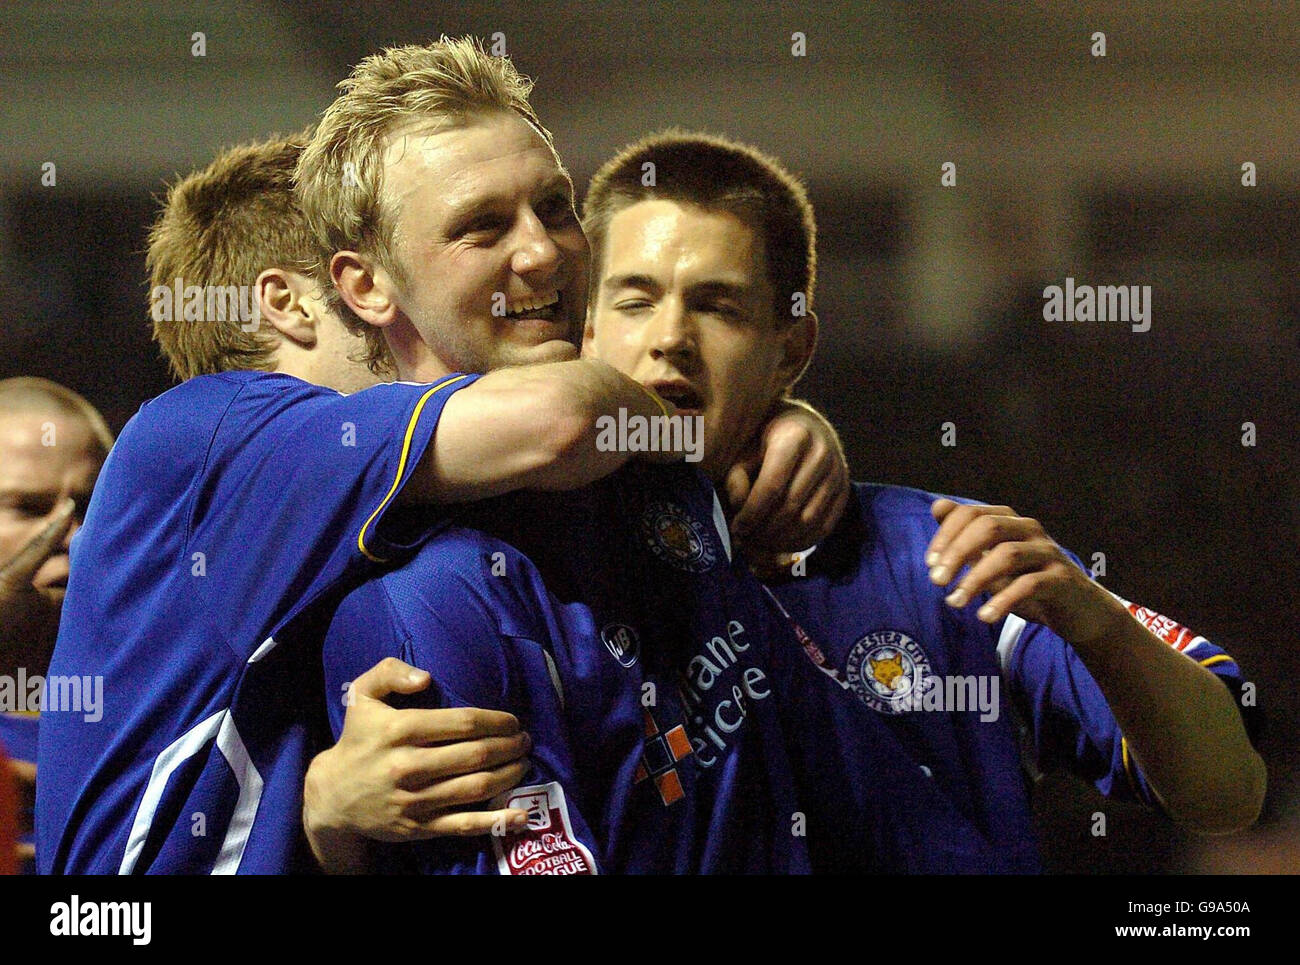 Leicester City's Stephen Hughes is congratulated by team mates after scoring during the Coca-Cola Championship match against Crystal Palace at the Walkers Stadium, Leicester, Friday April 7, 2006. Stock Photo